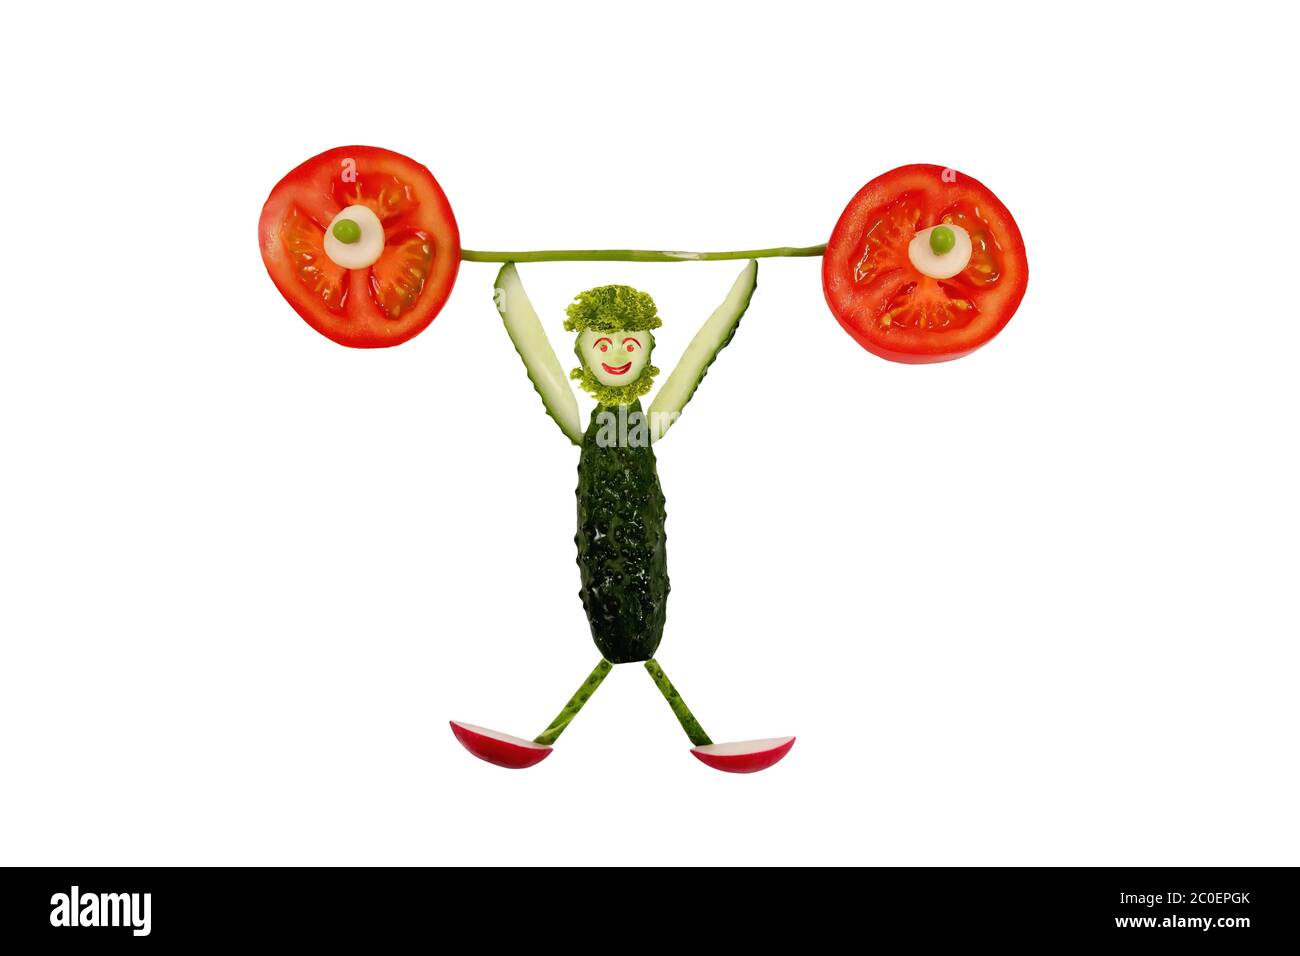 Healthy eating. Funny little man of the cucumber slices raises tomato bar. Stock Photo